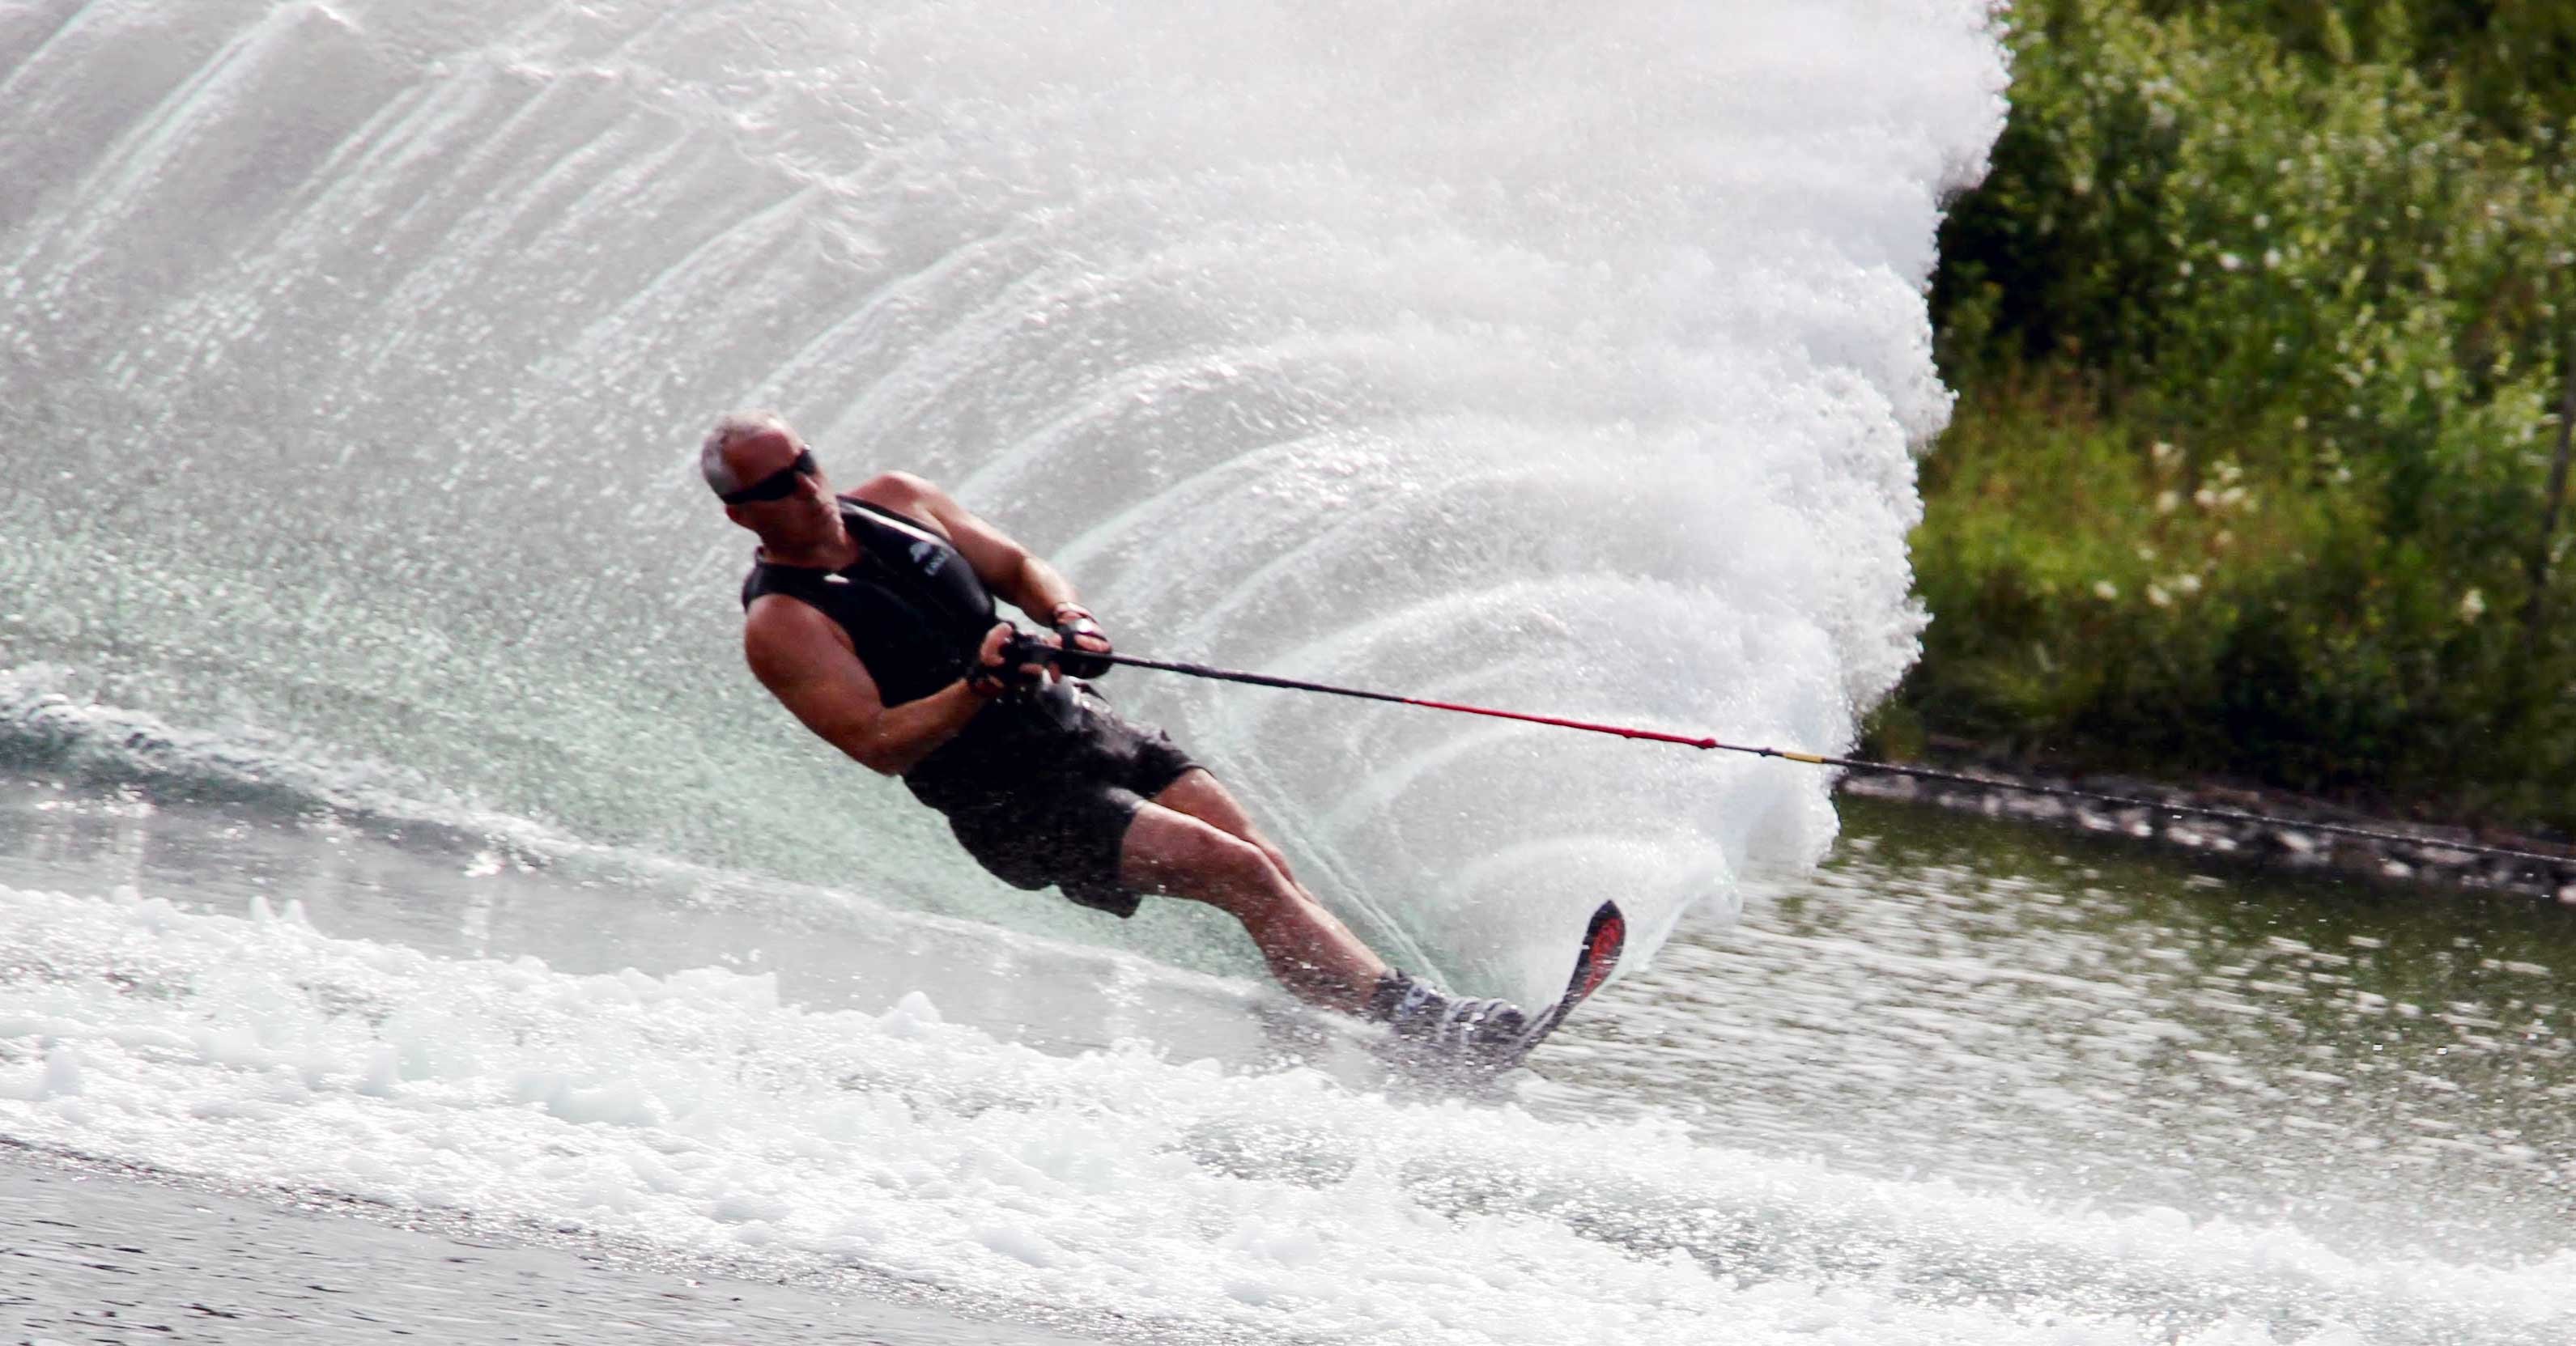 Mike Royal completes a turn creating a large spray of water while slalom waterskiing at the 2019 IWWF World Disabled Waterski Championshipsheld in Norway.  